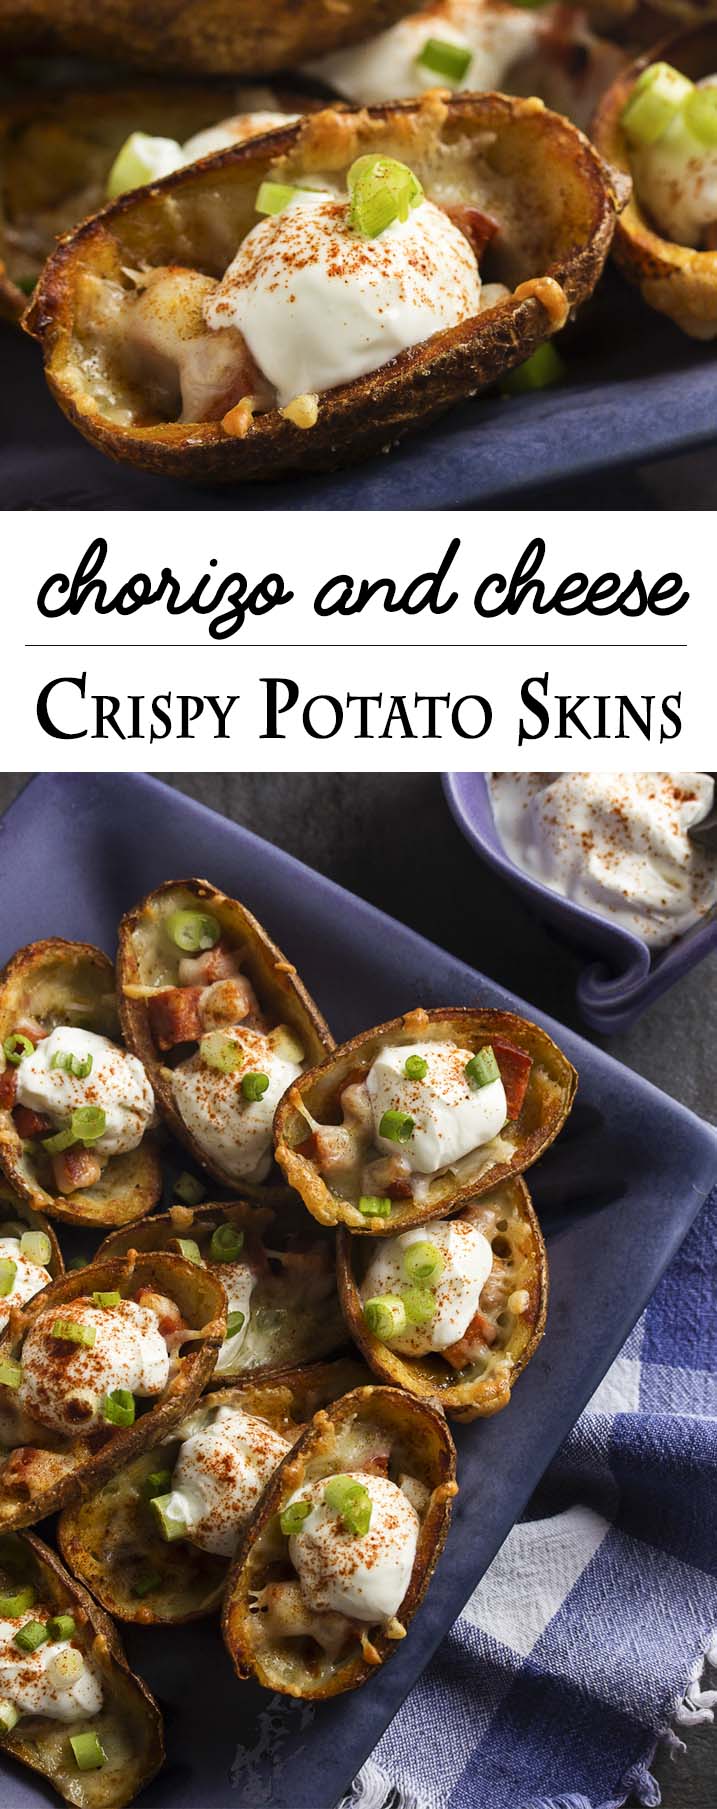 These crispy potato skins are brushed with bacon fat and browned before being filled with chorizo and manchego cheese for a great party appetizer. | justalittlebitofbacon.com